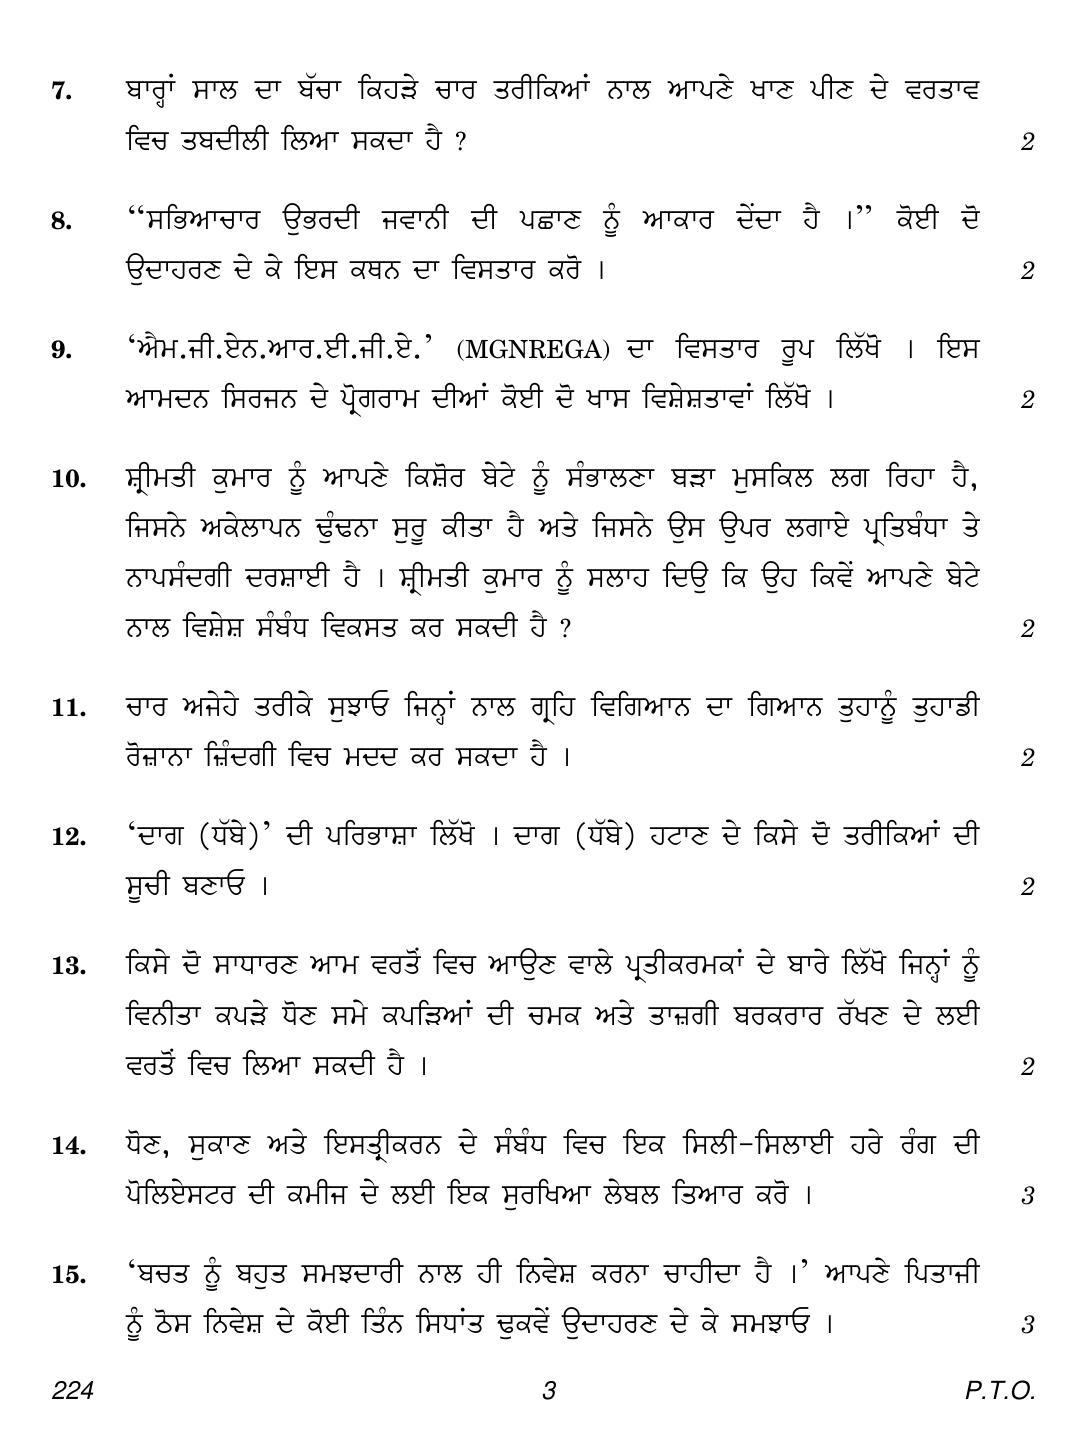 CBSE Class 12 224 (Home Science Punjabi) 2018 Question Paper - Page 3